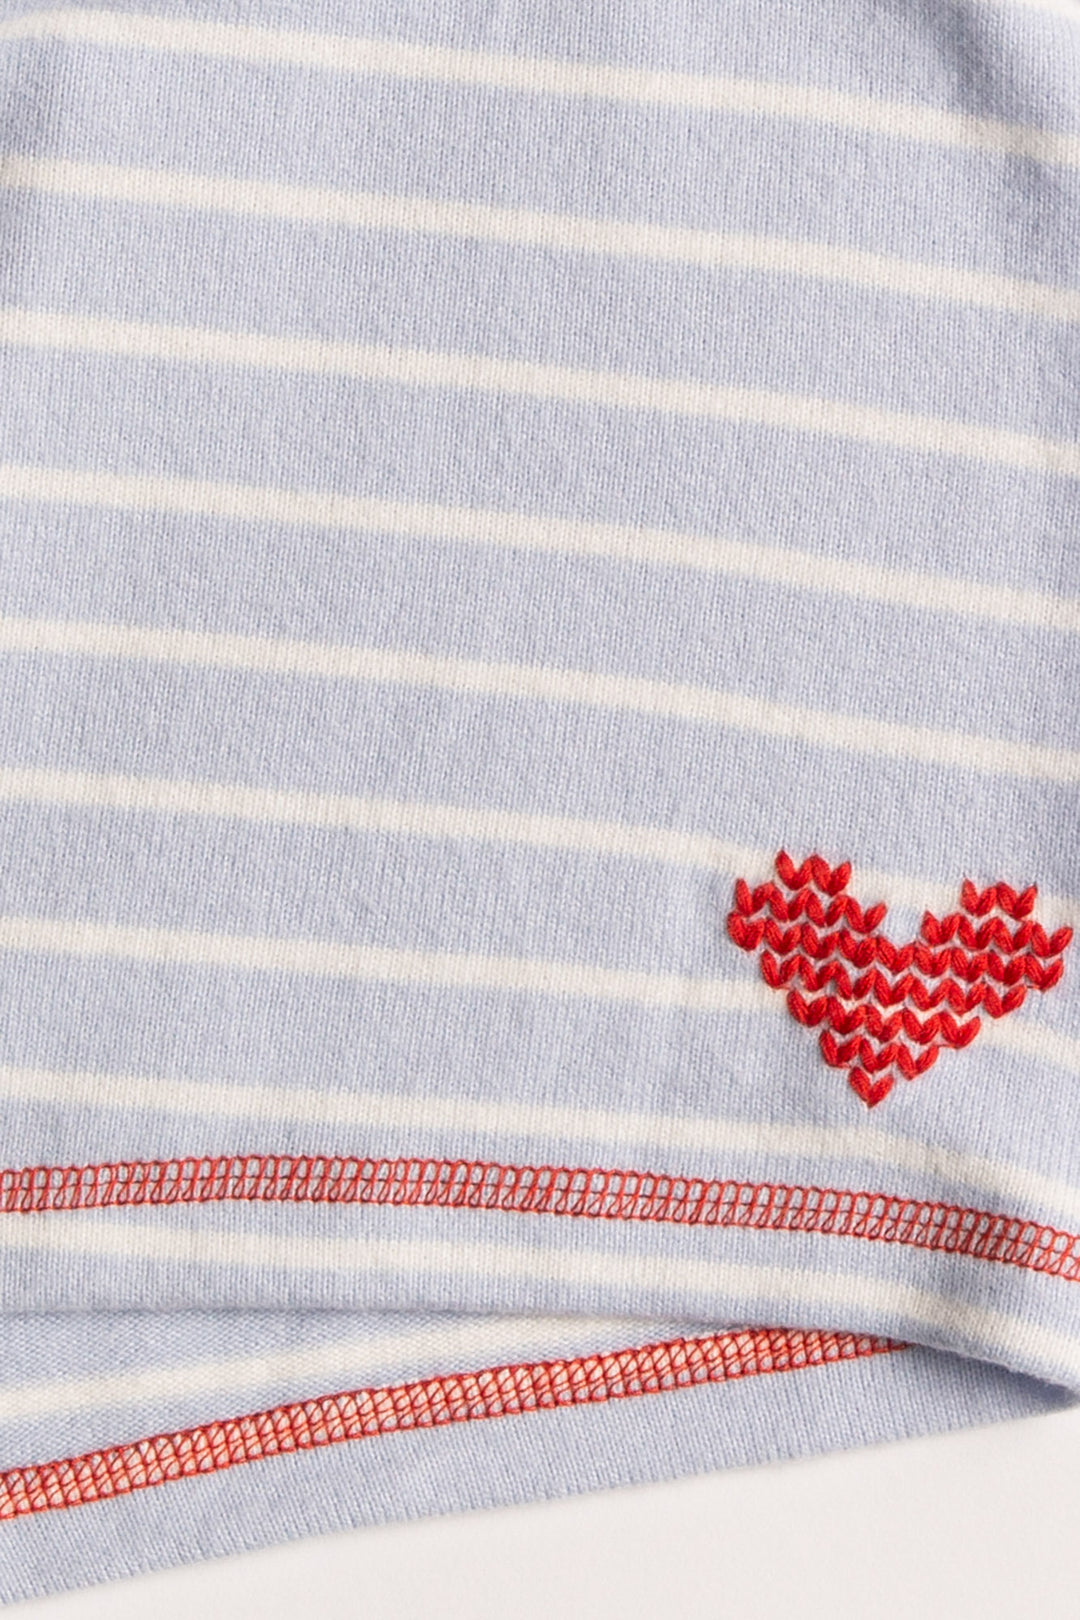 Sleep tank top in blue-white mini striped knit, with red stitching & heart embroidery on back neck. (7257680412772)